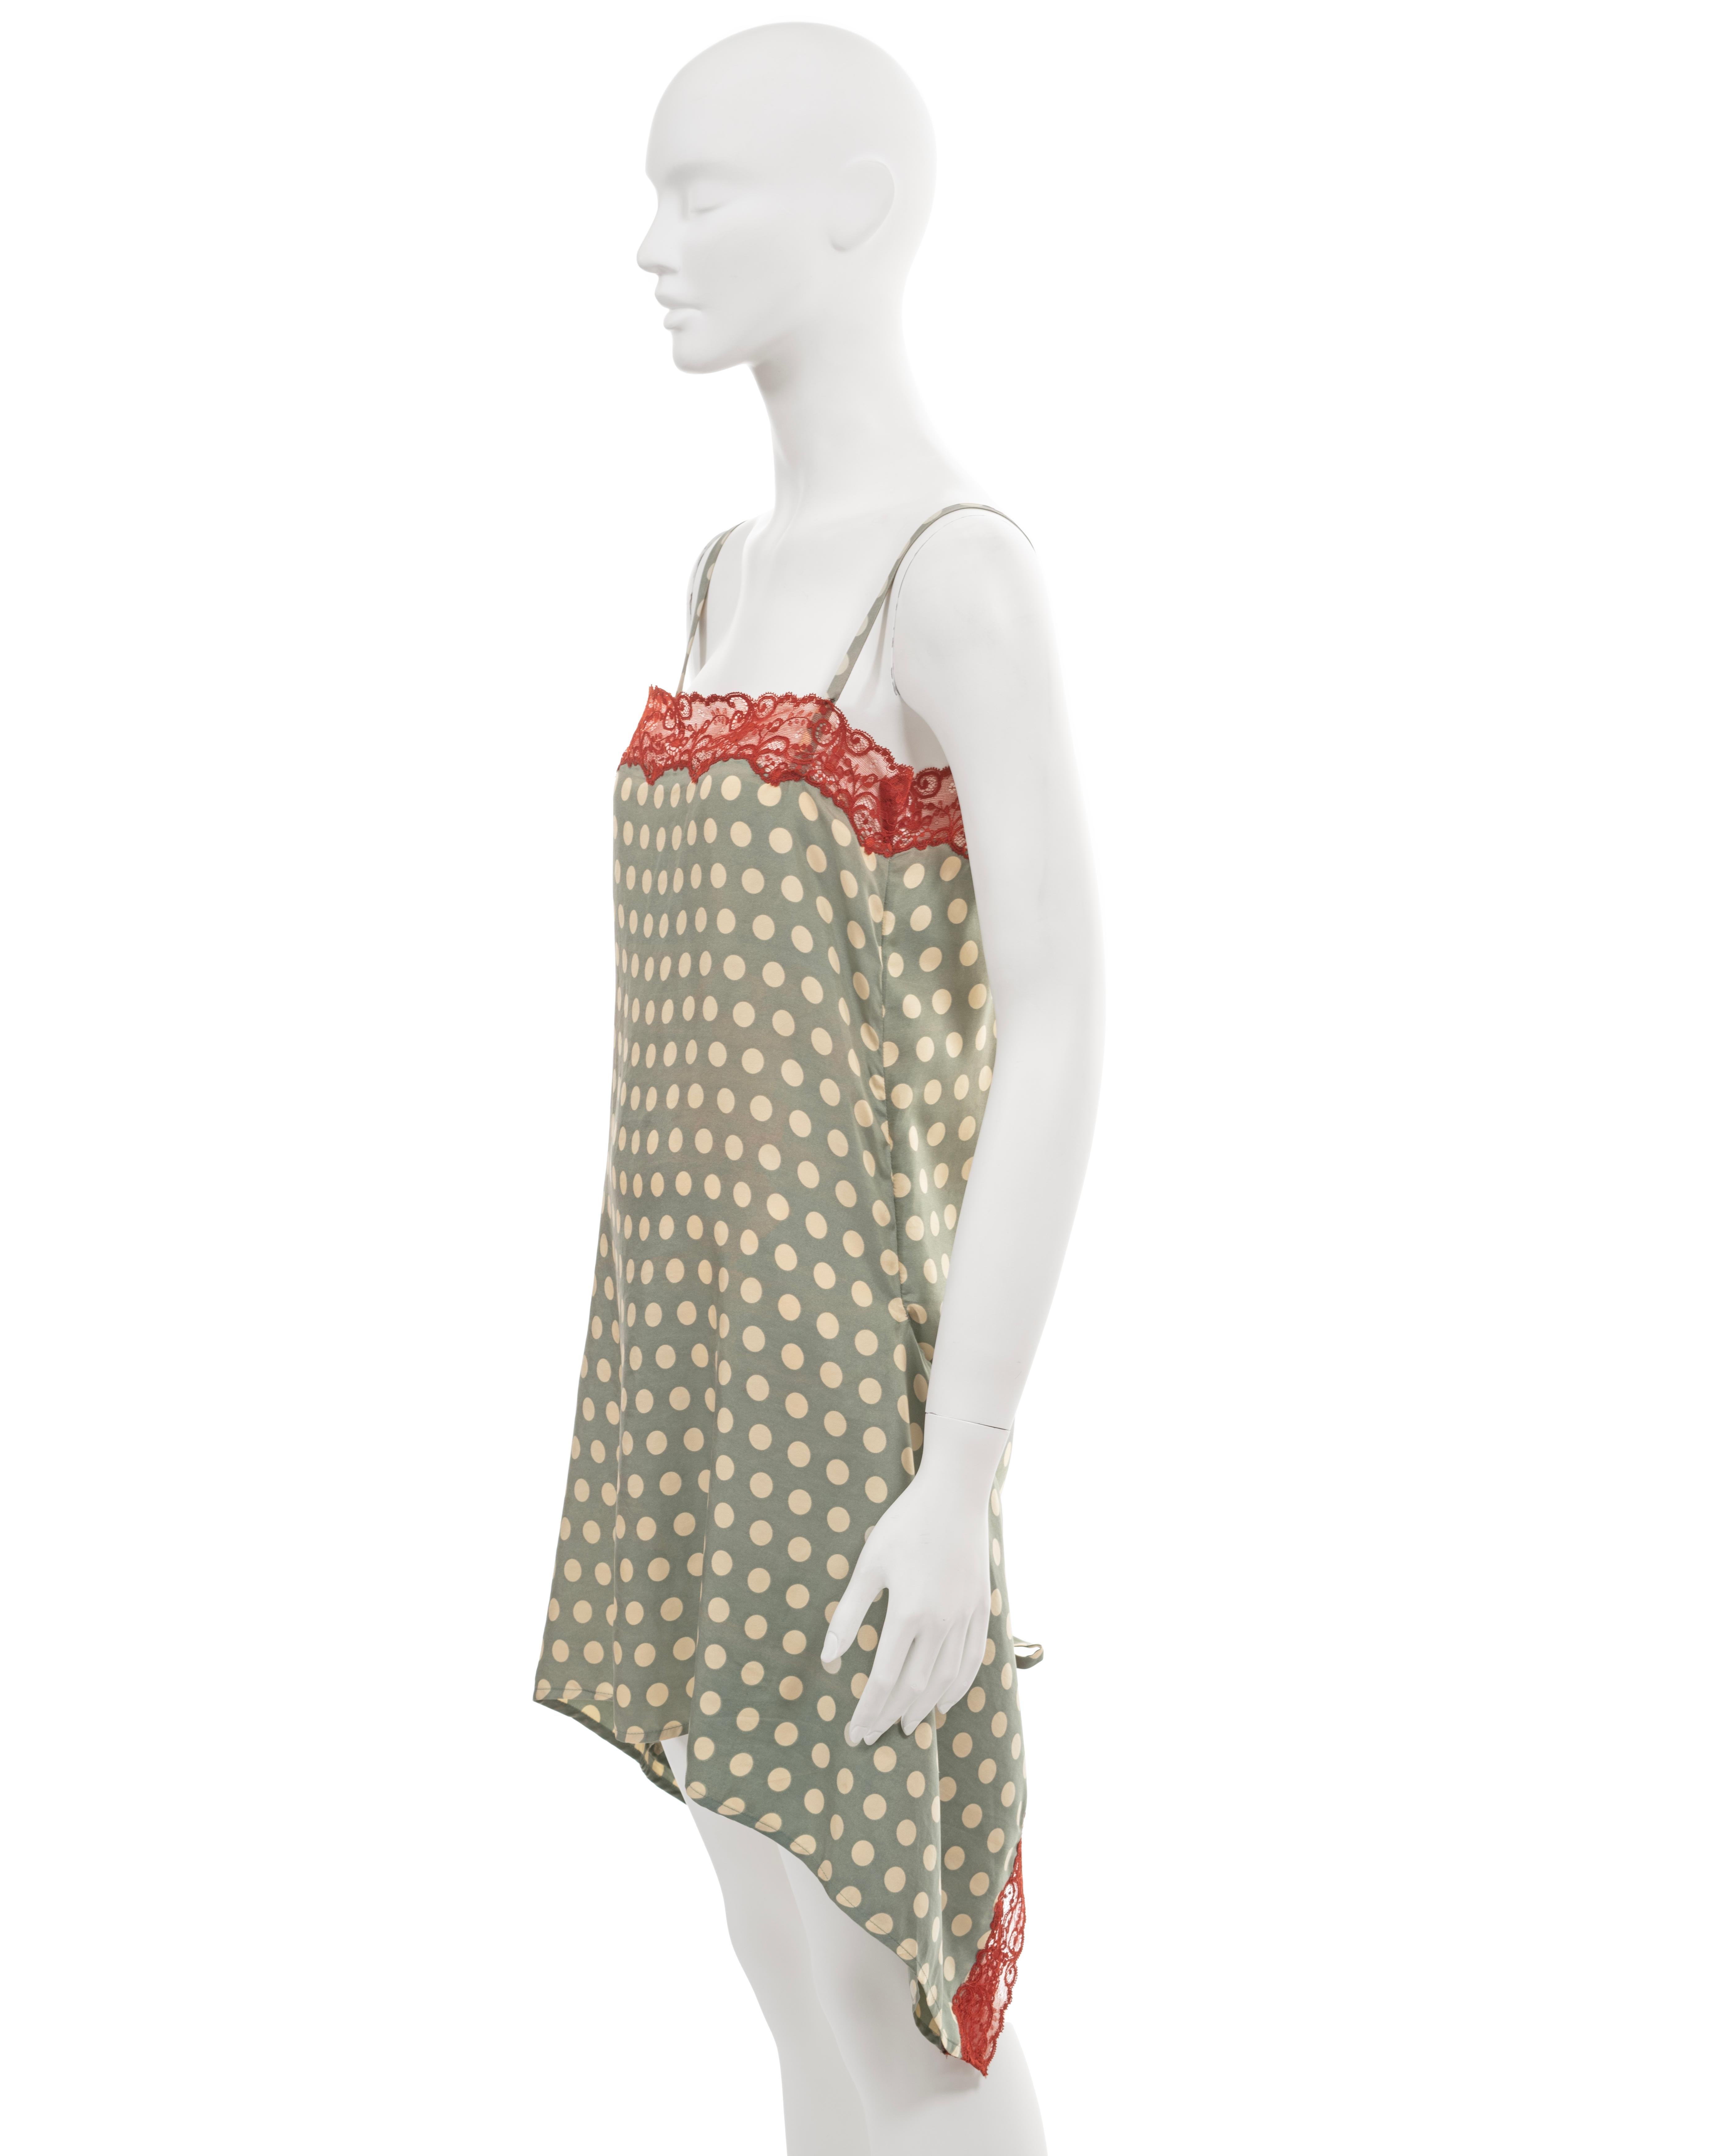 Jean Paul Gaultier green polkadot silk slip dress with red lace trim, ss 1992 For Sale 8